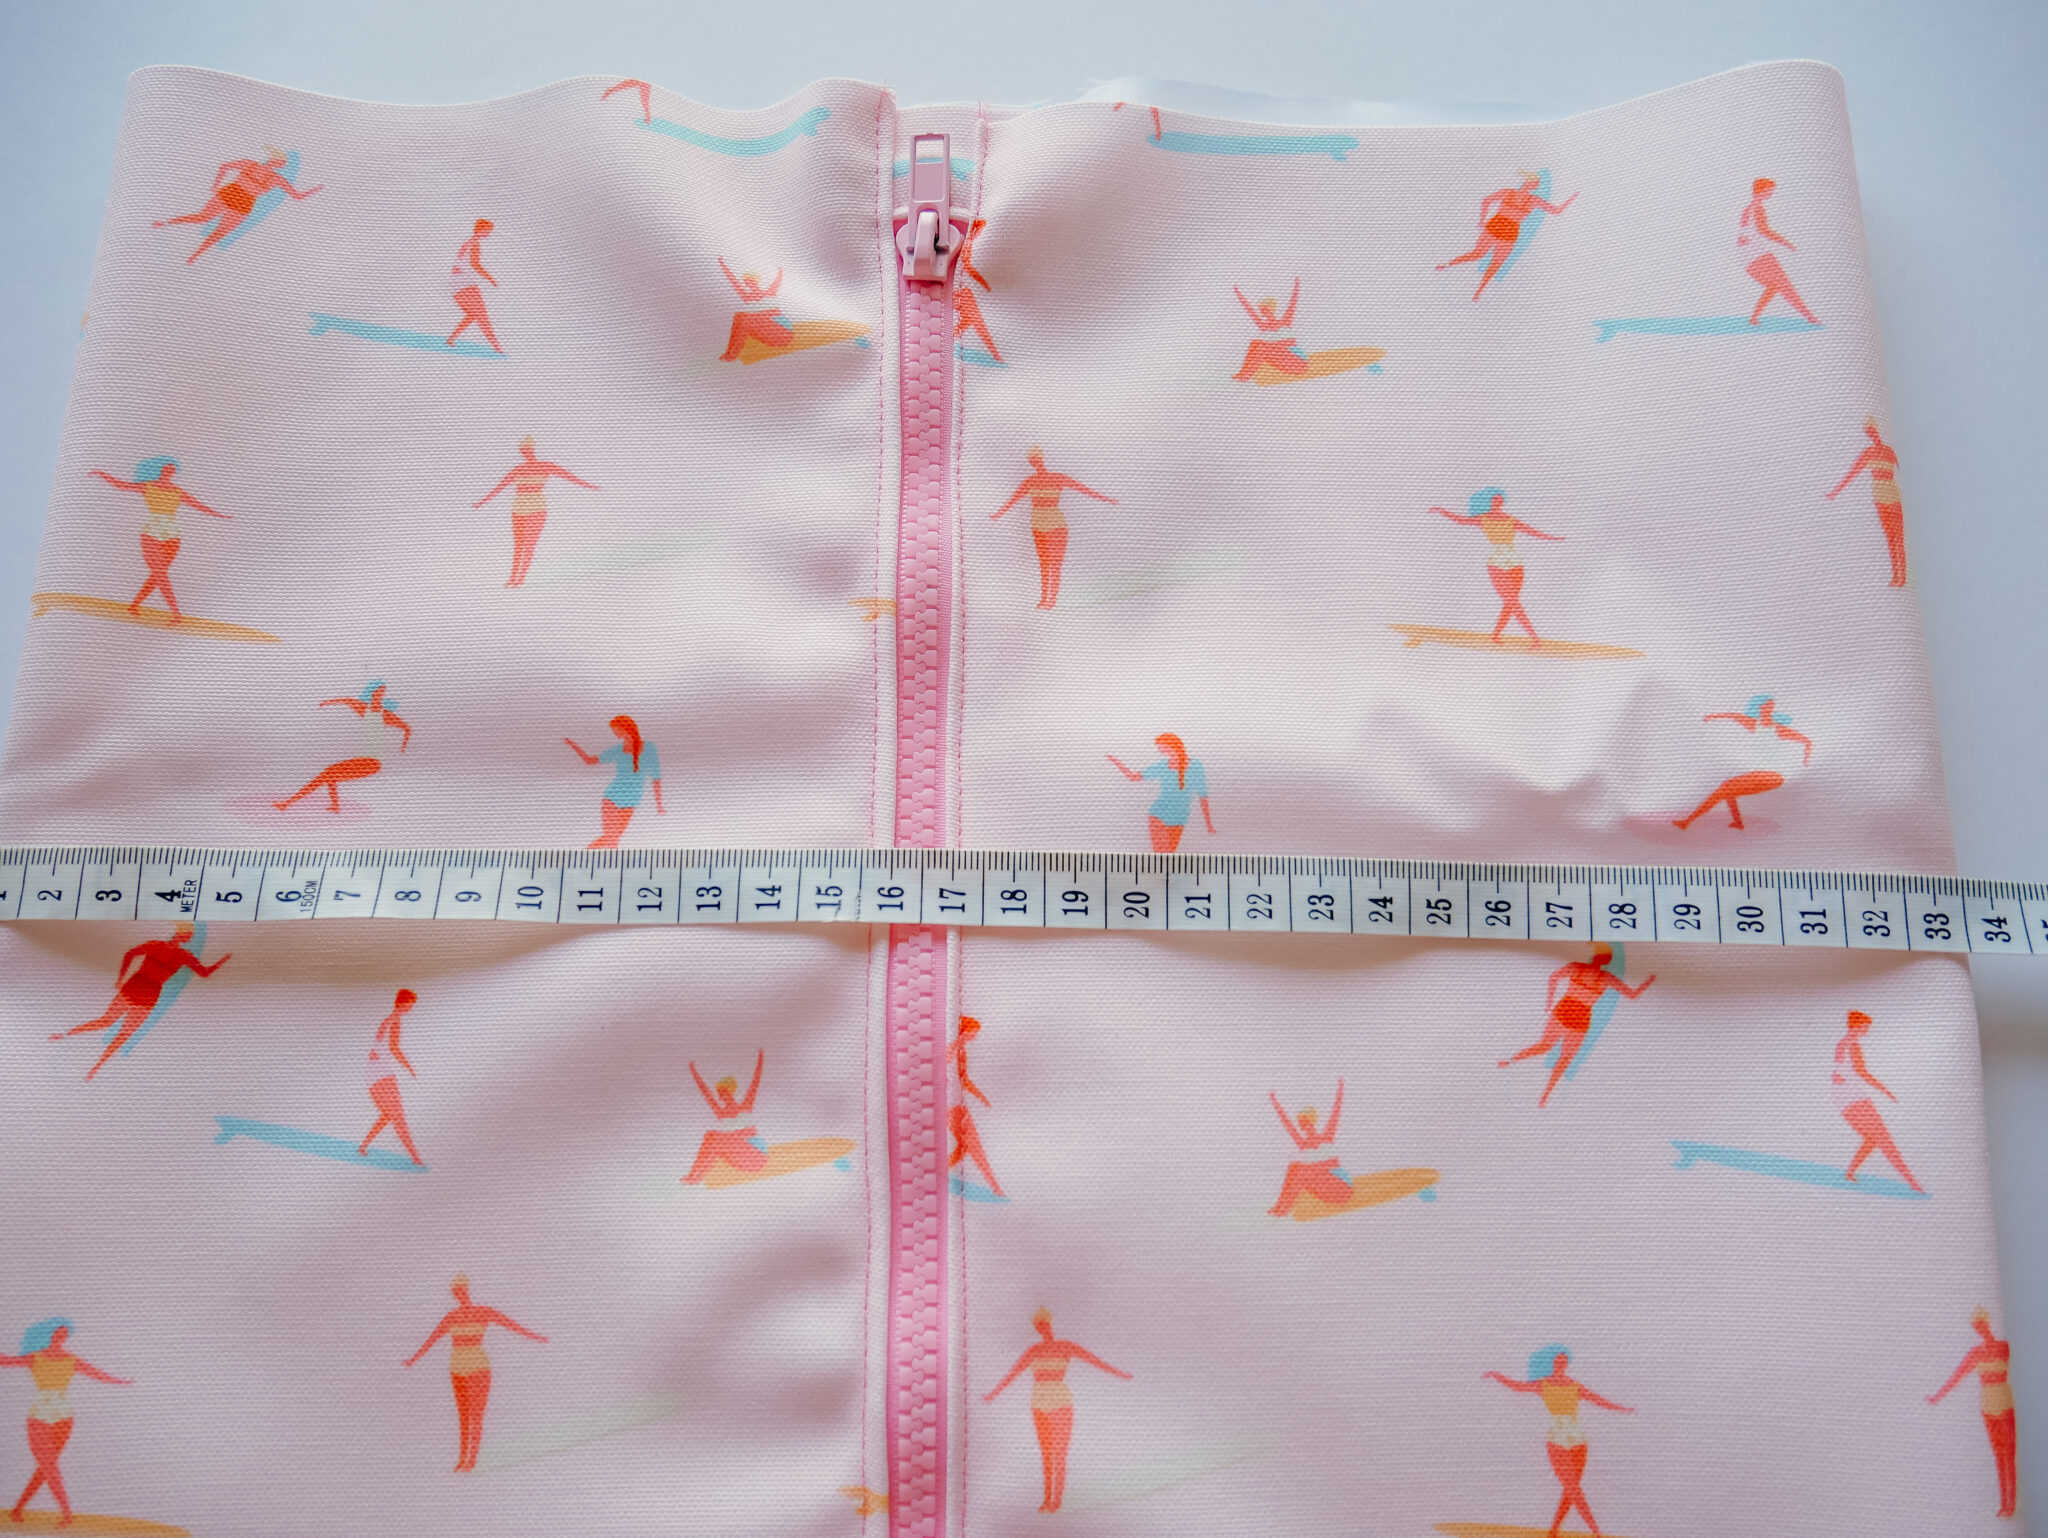 A fabric rectangle featuring a design with small female surfers surfing through a pink background lays on a white surface. A pink zipper has been stitched up the middle. A small white measuring tape has been placed over the fabric.